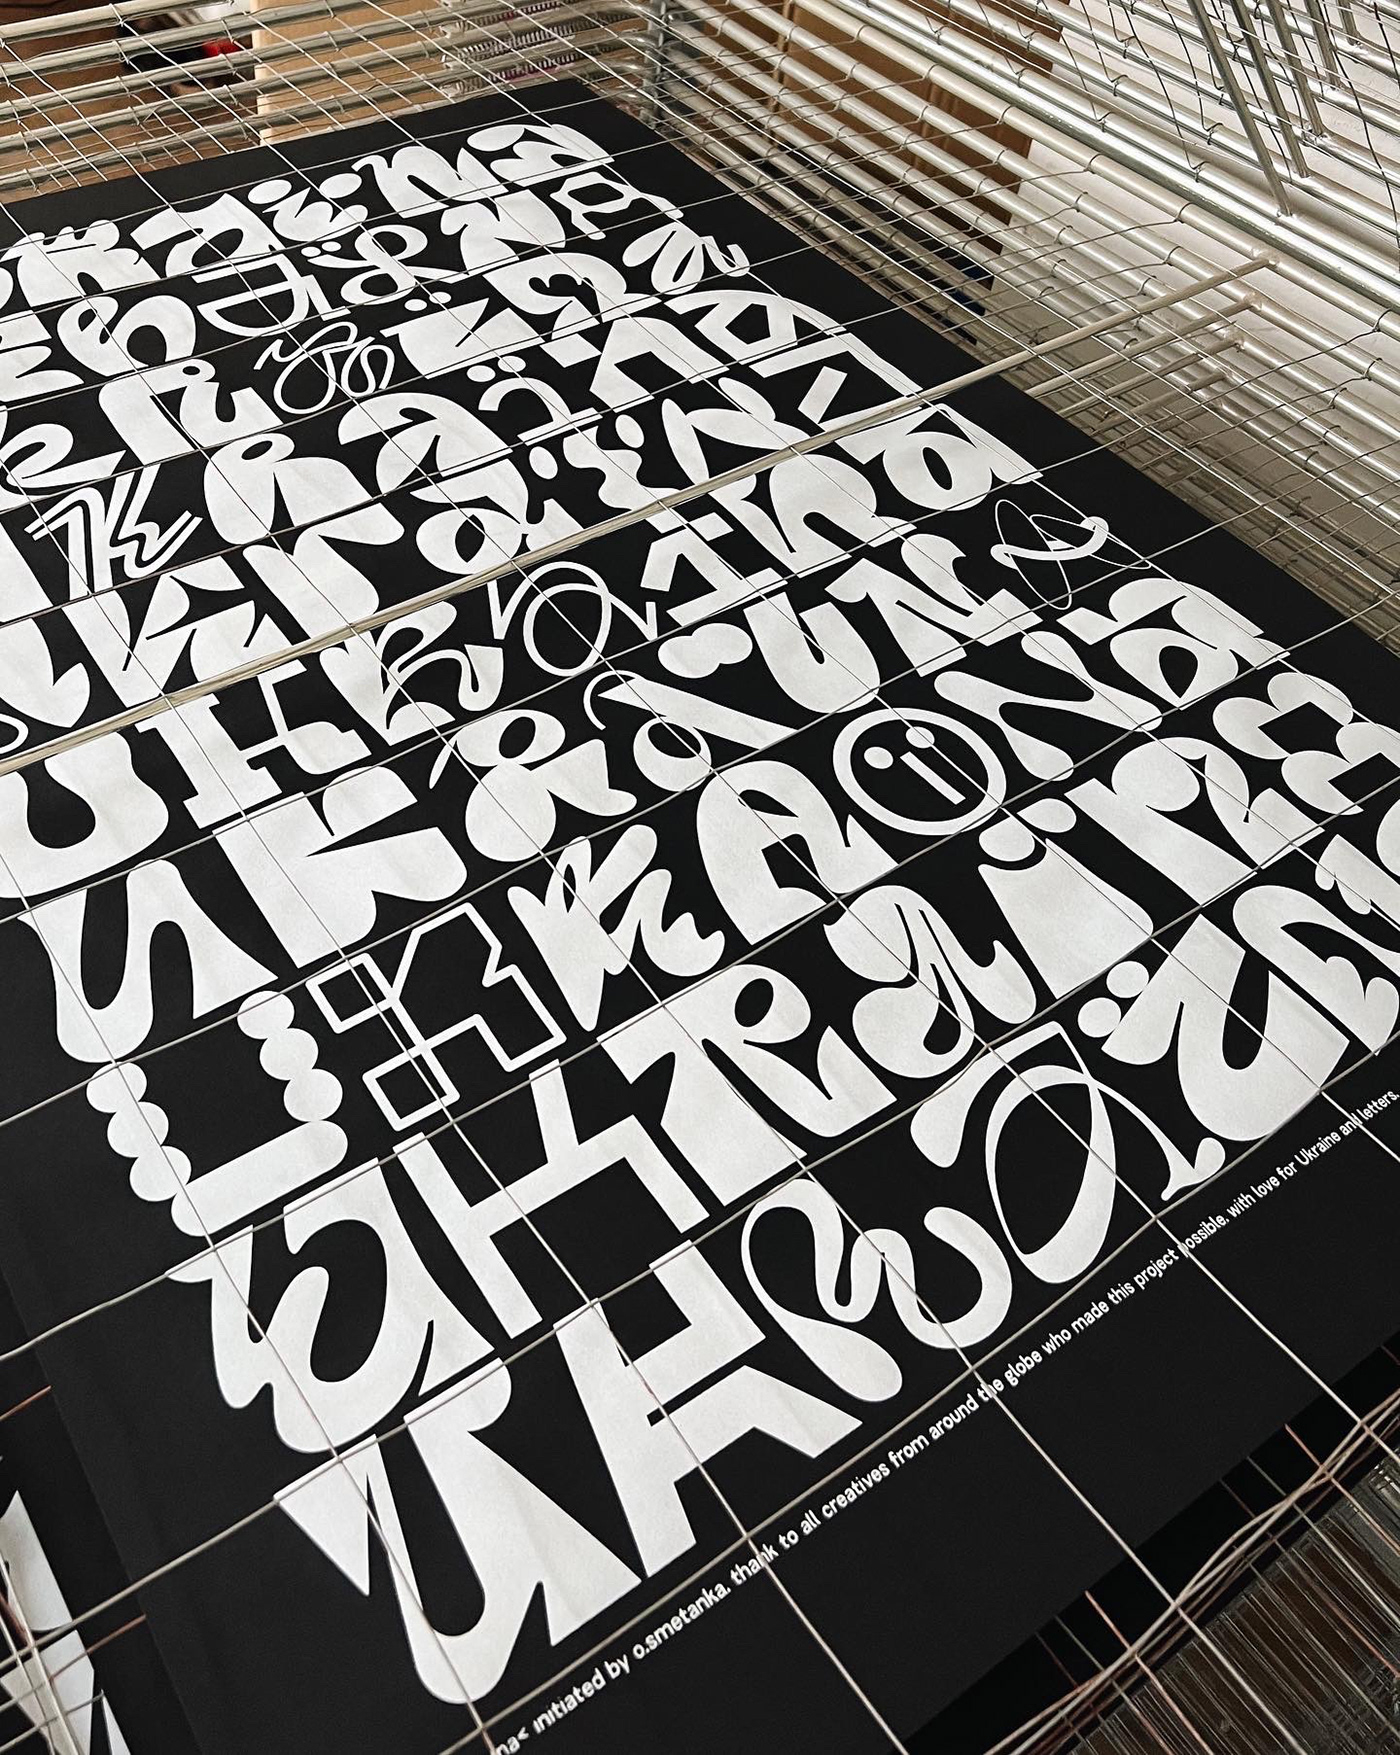 typography   Poster Design lettering Experimental Typography Photography  art direction  charity ukraine Fashion  editorial